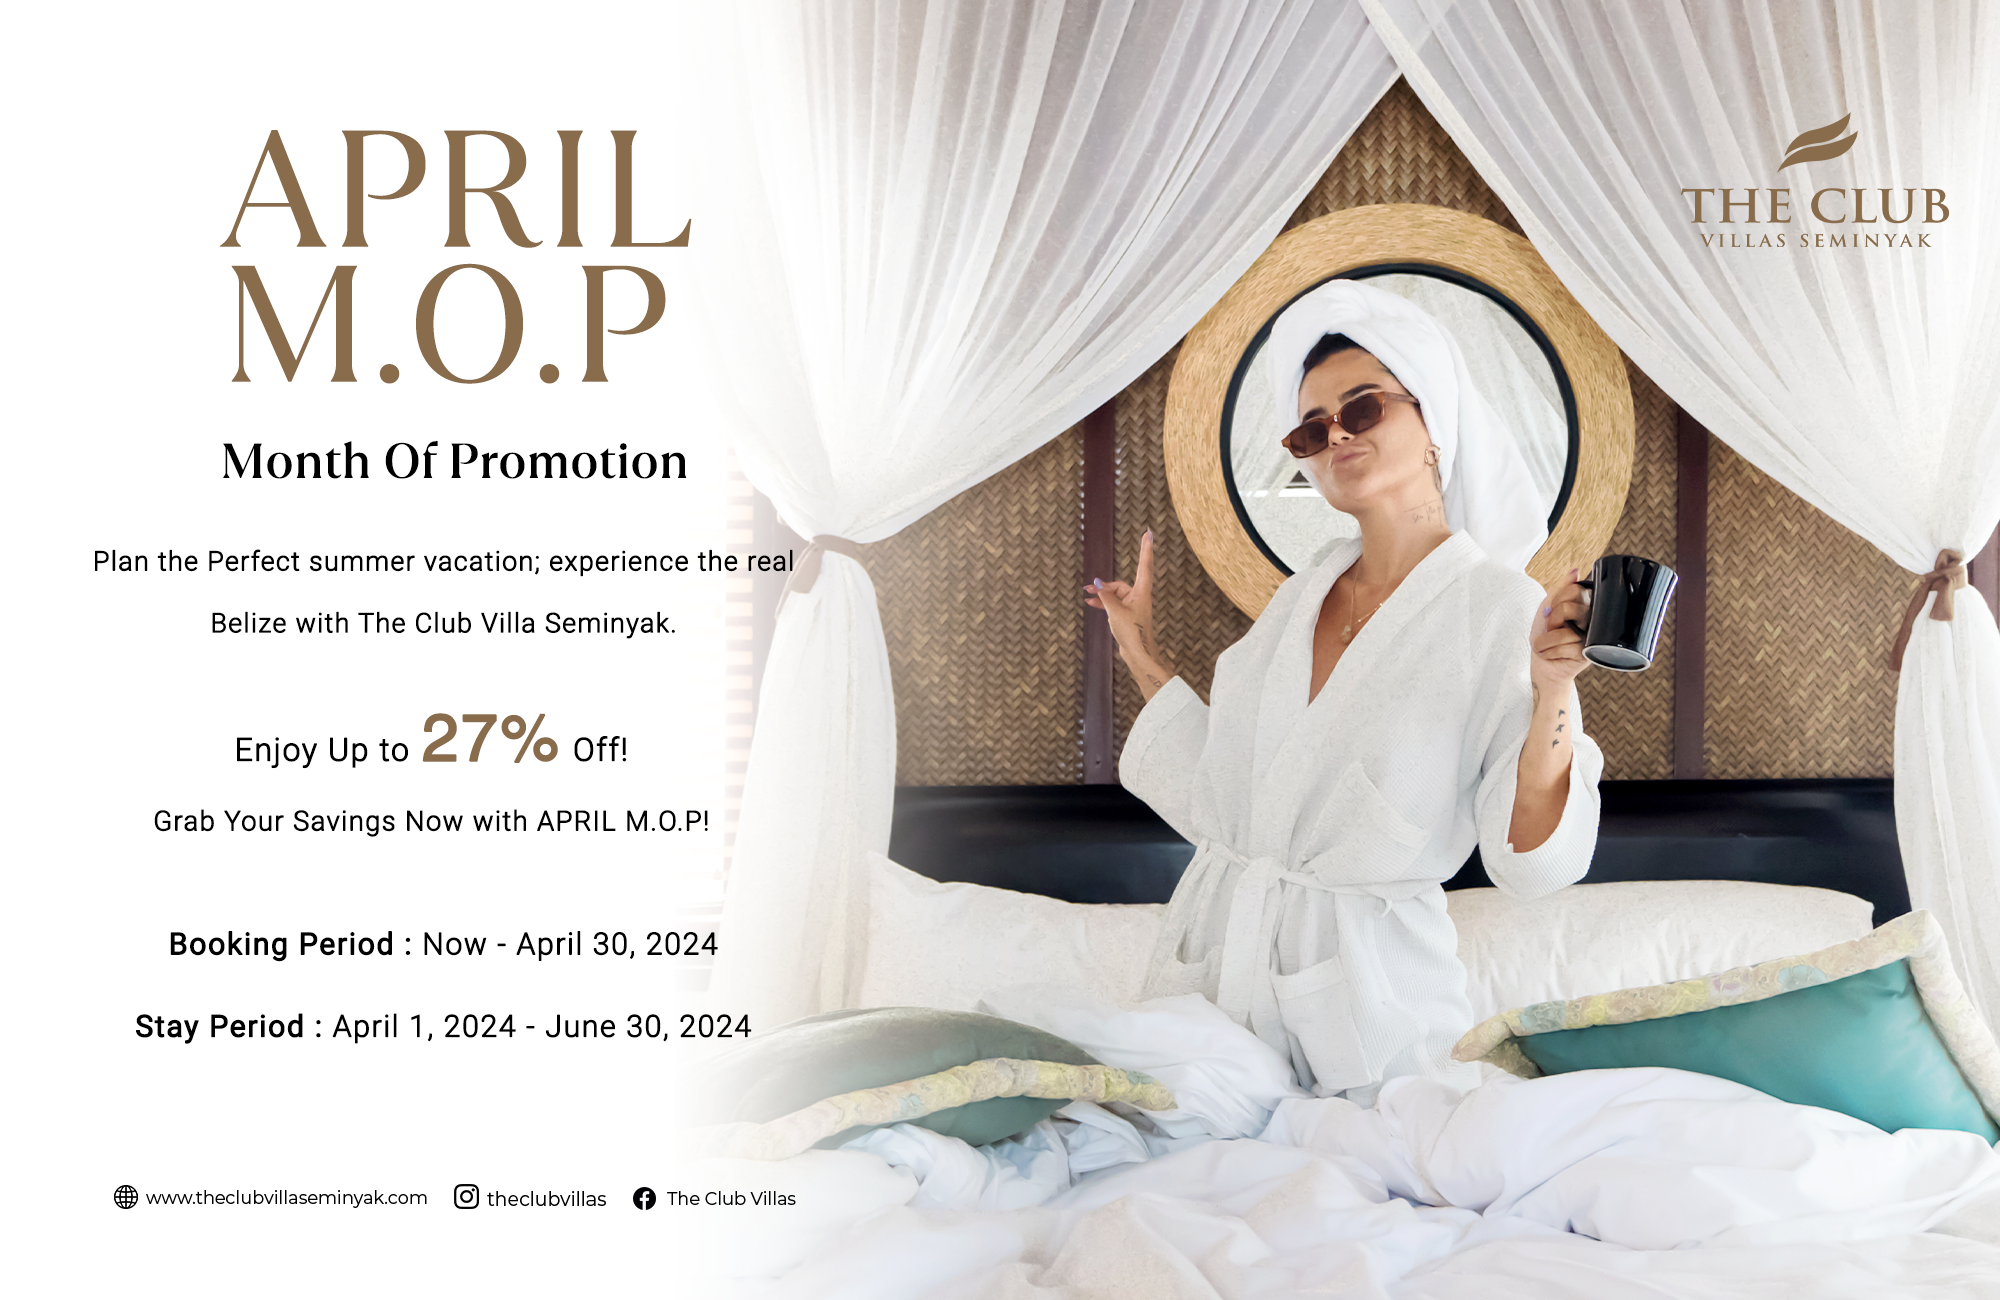 APRIL M.O.P ( Month Of Promotion )